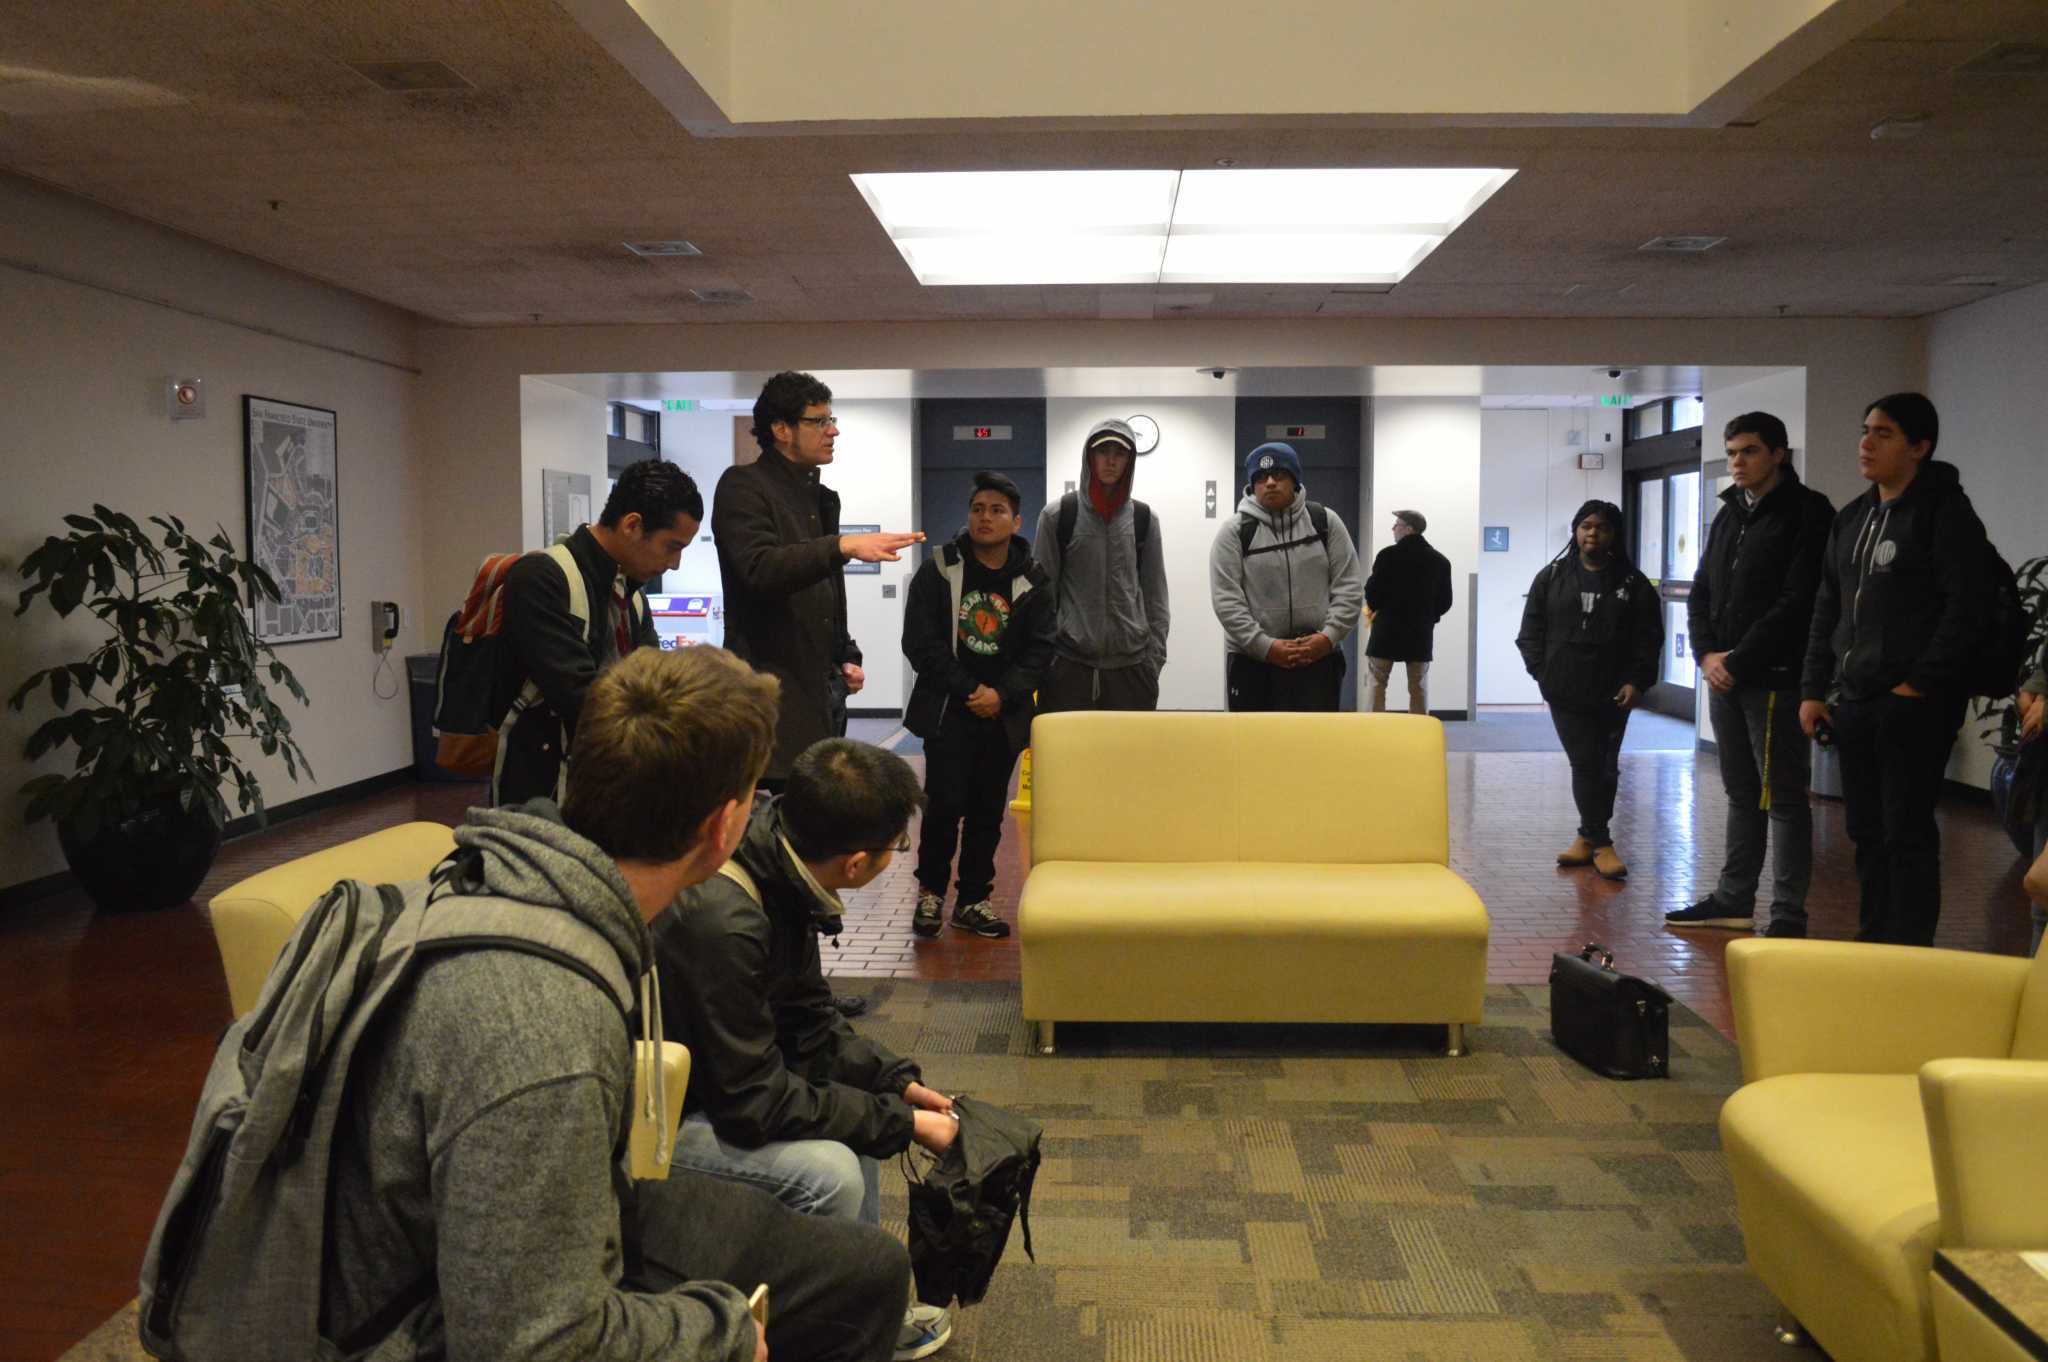 Robert Ovetz addresses a group of CASHH members in the lobby of the administration building on campus on Thursday, December 8, 2016. (Photo: Jacqueline Haudek)